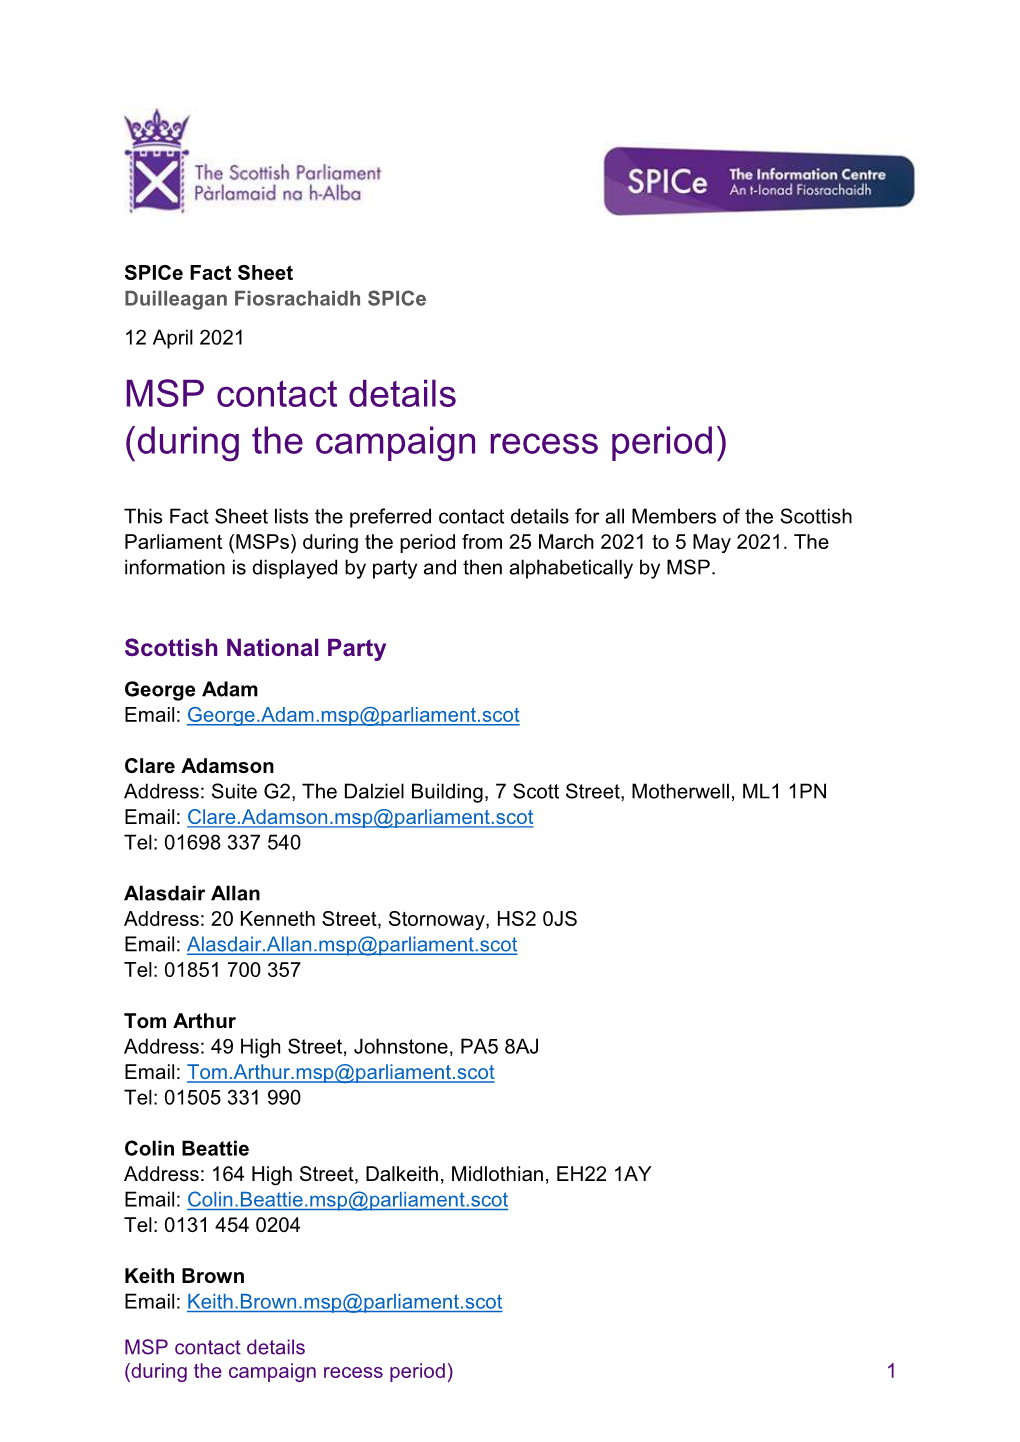 MSP Contact Details (During the Campaign Recess Period)